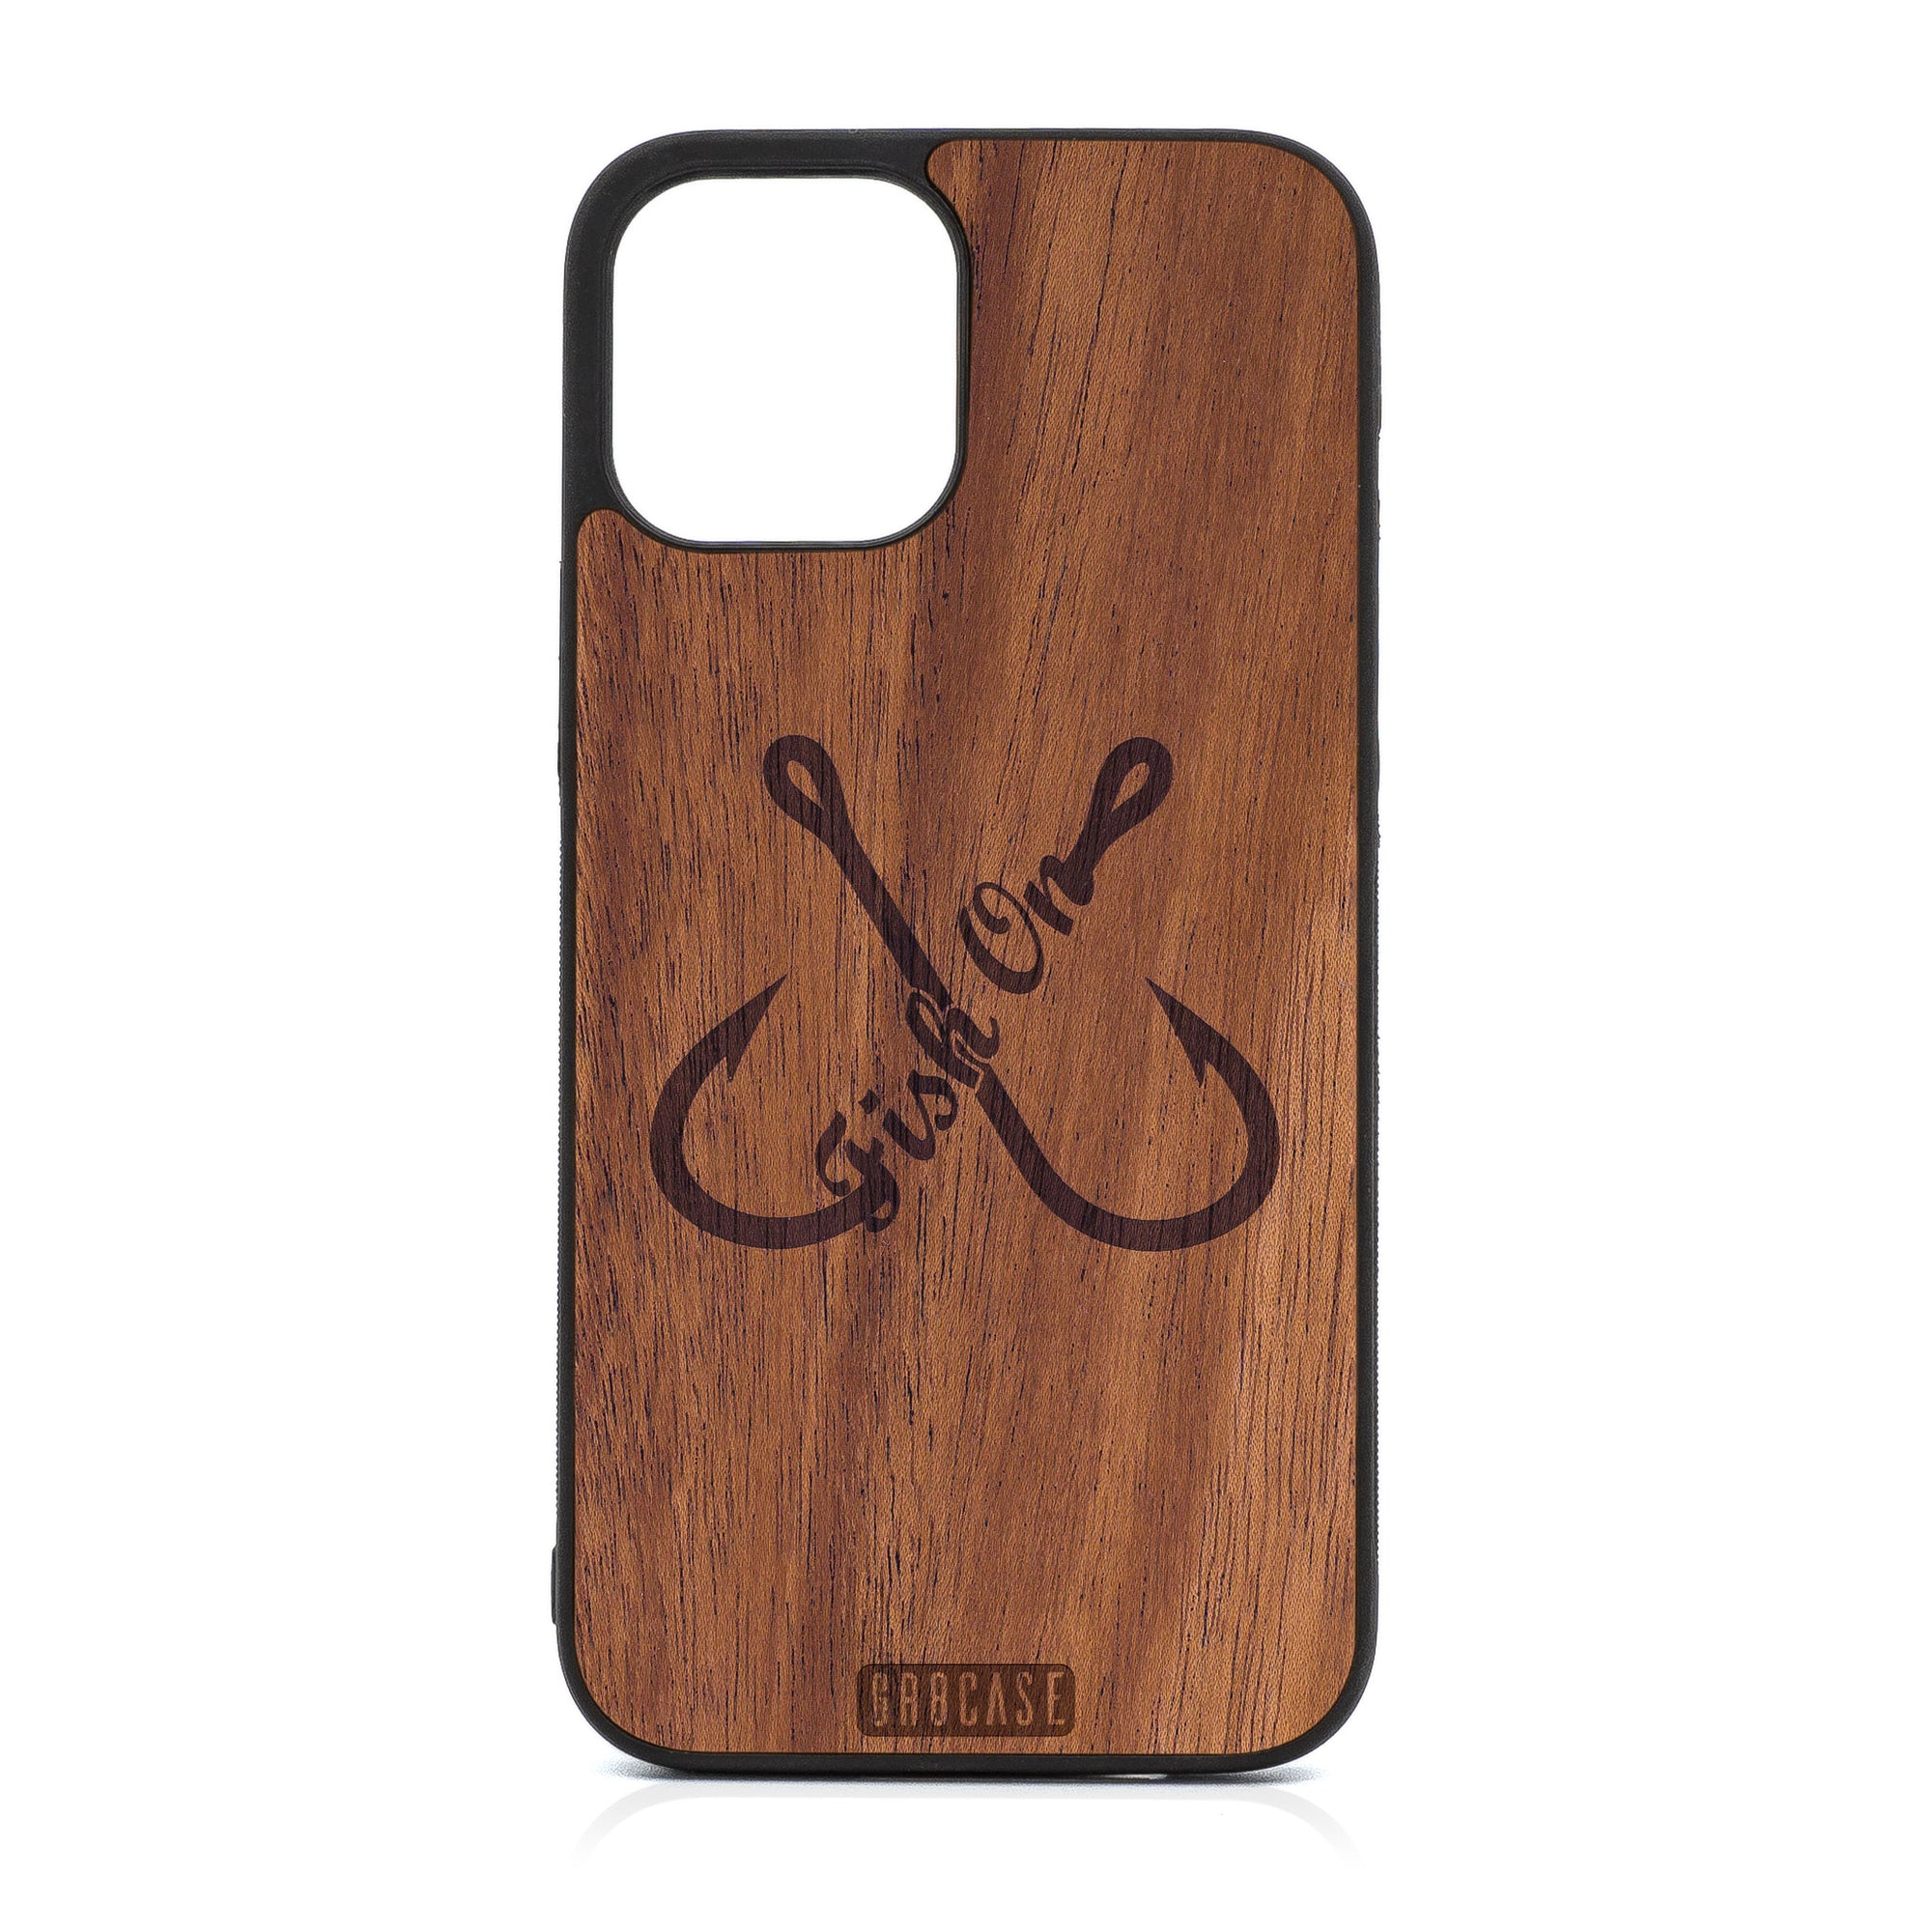 Fish On (Fish Hooks) Design Wood Case For iPhone 12 Pro Max